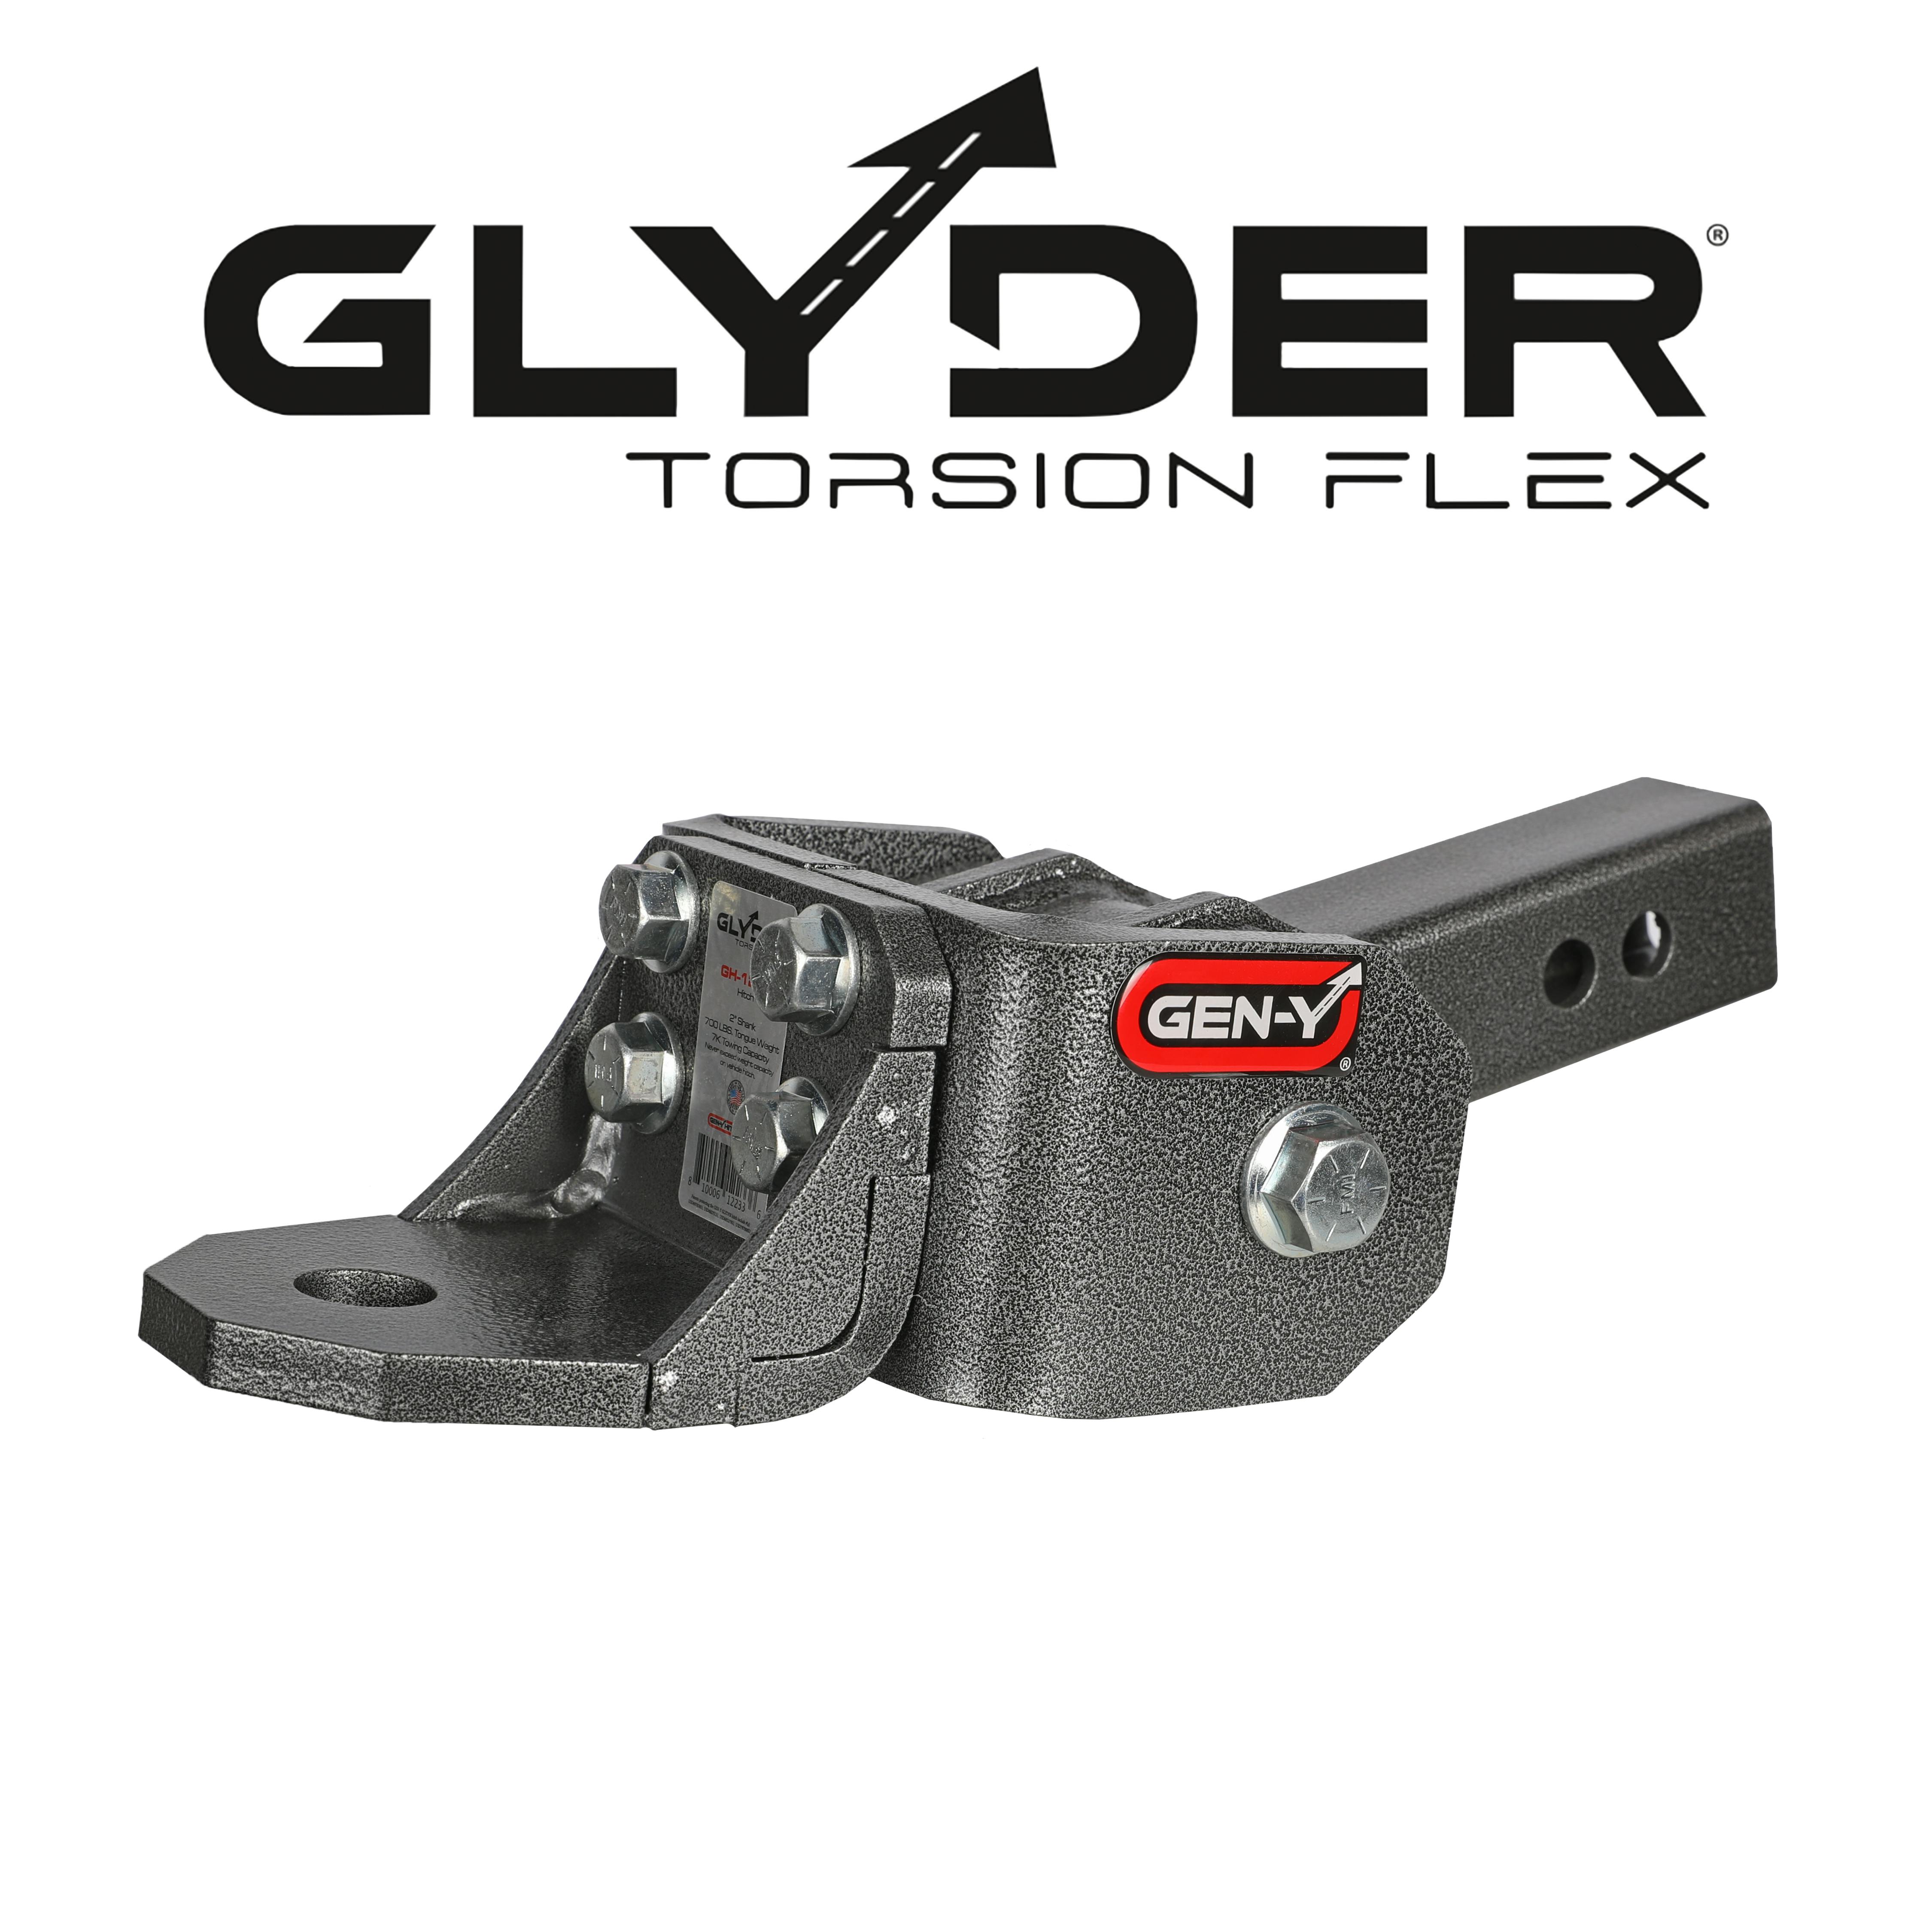 GEN-Y Hitch GH-12013 Glyder 2 5/16in Single Ball Attachment 1in Diameter Ball Shank 7K Towing